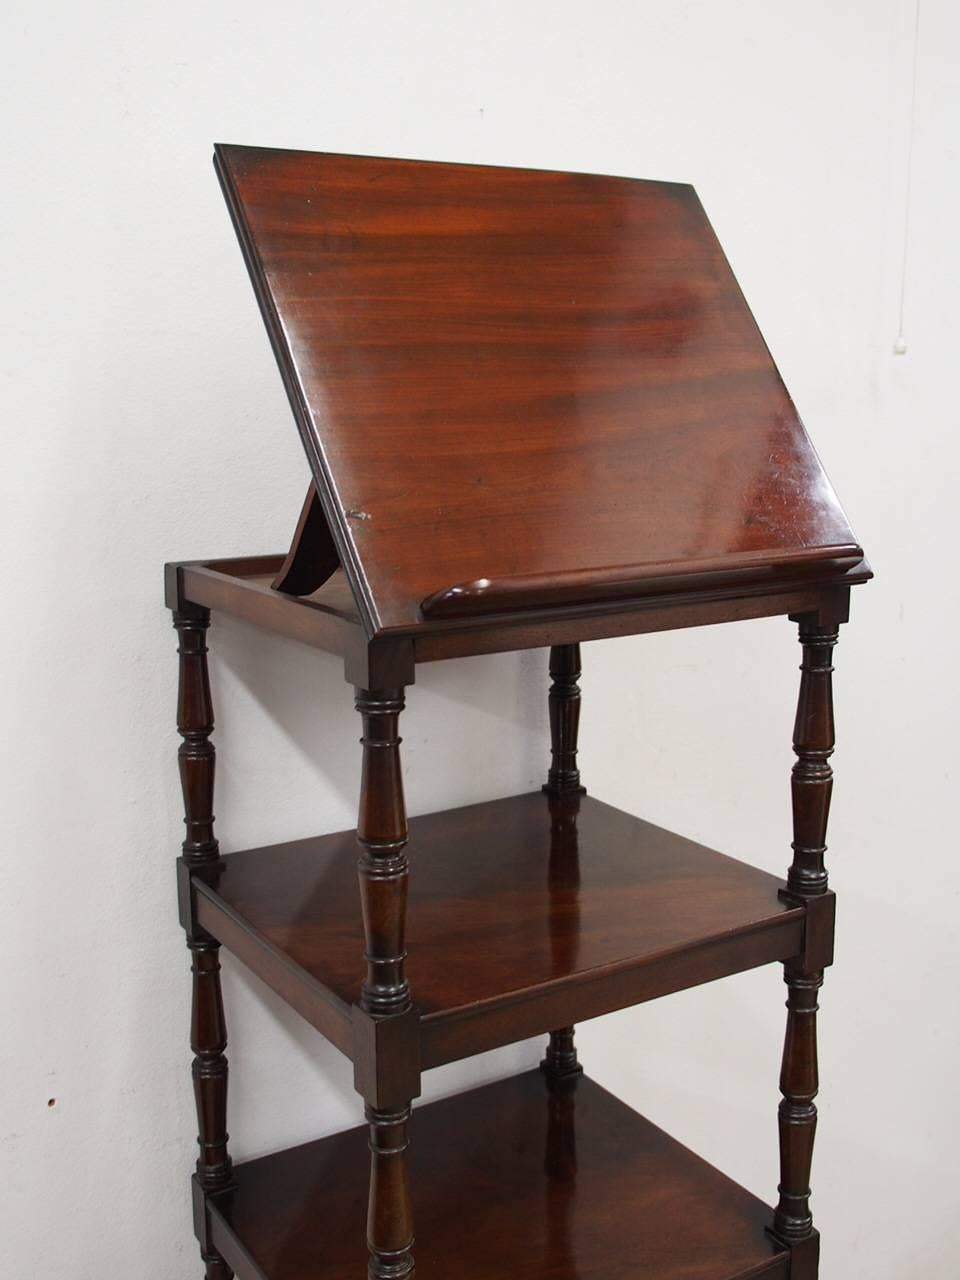 Regency whatnot in figured Spanish mahogany, all supported on very fine ring turned supports on brass castors, circa 1820. The top tier acts as an adjustable book rack and beneath the lower tier is a single drawer with finely turned wooden knobs.